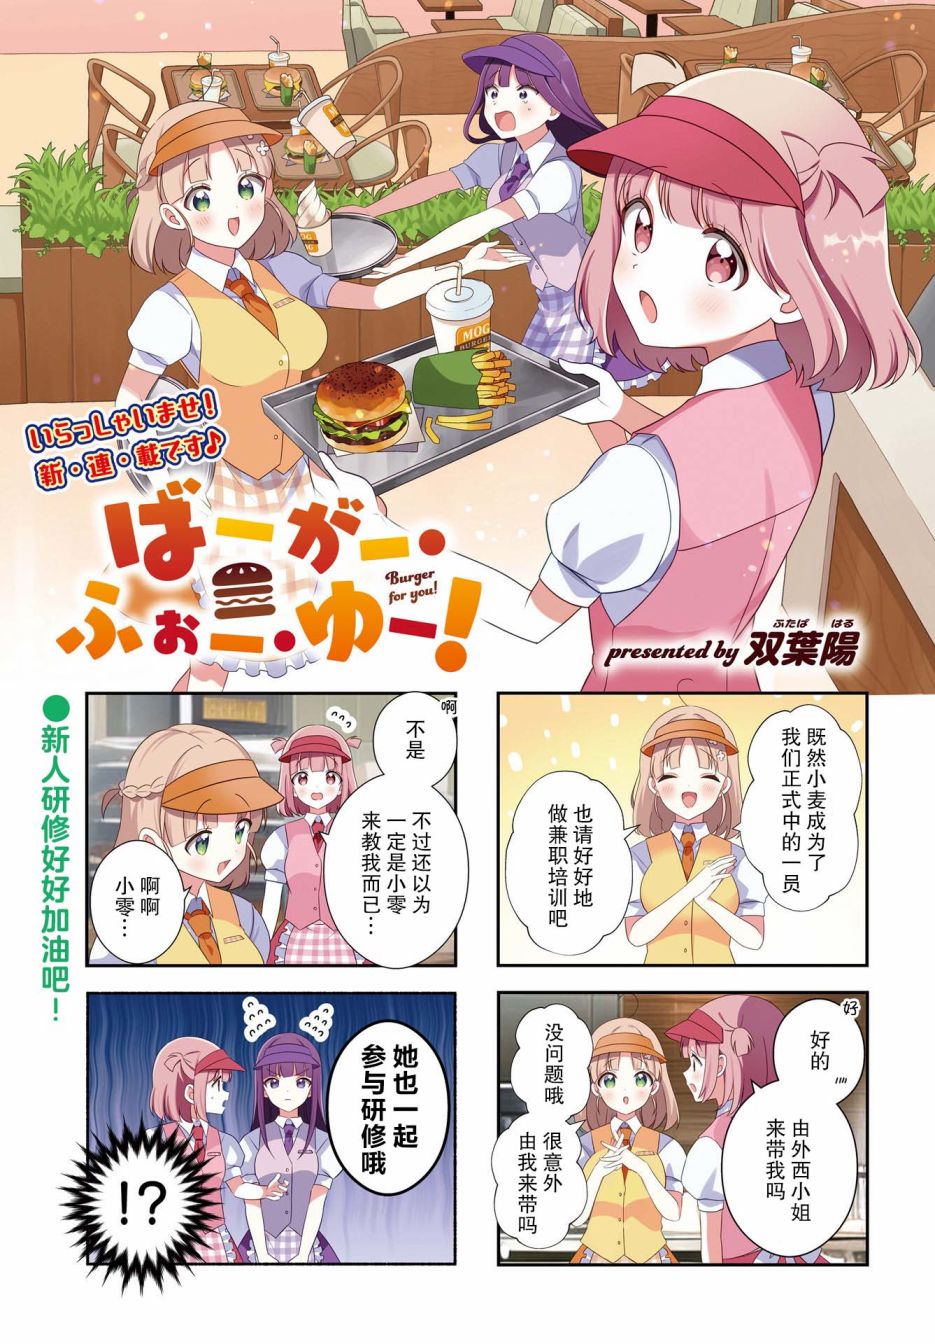 Burger For You! - 第04話 - 1